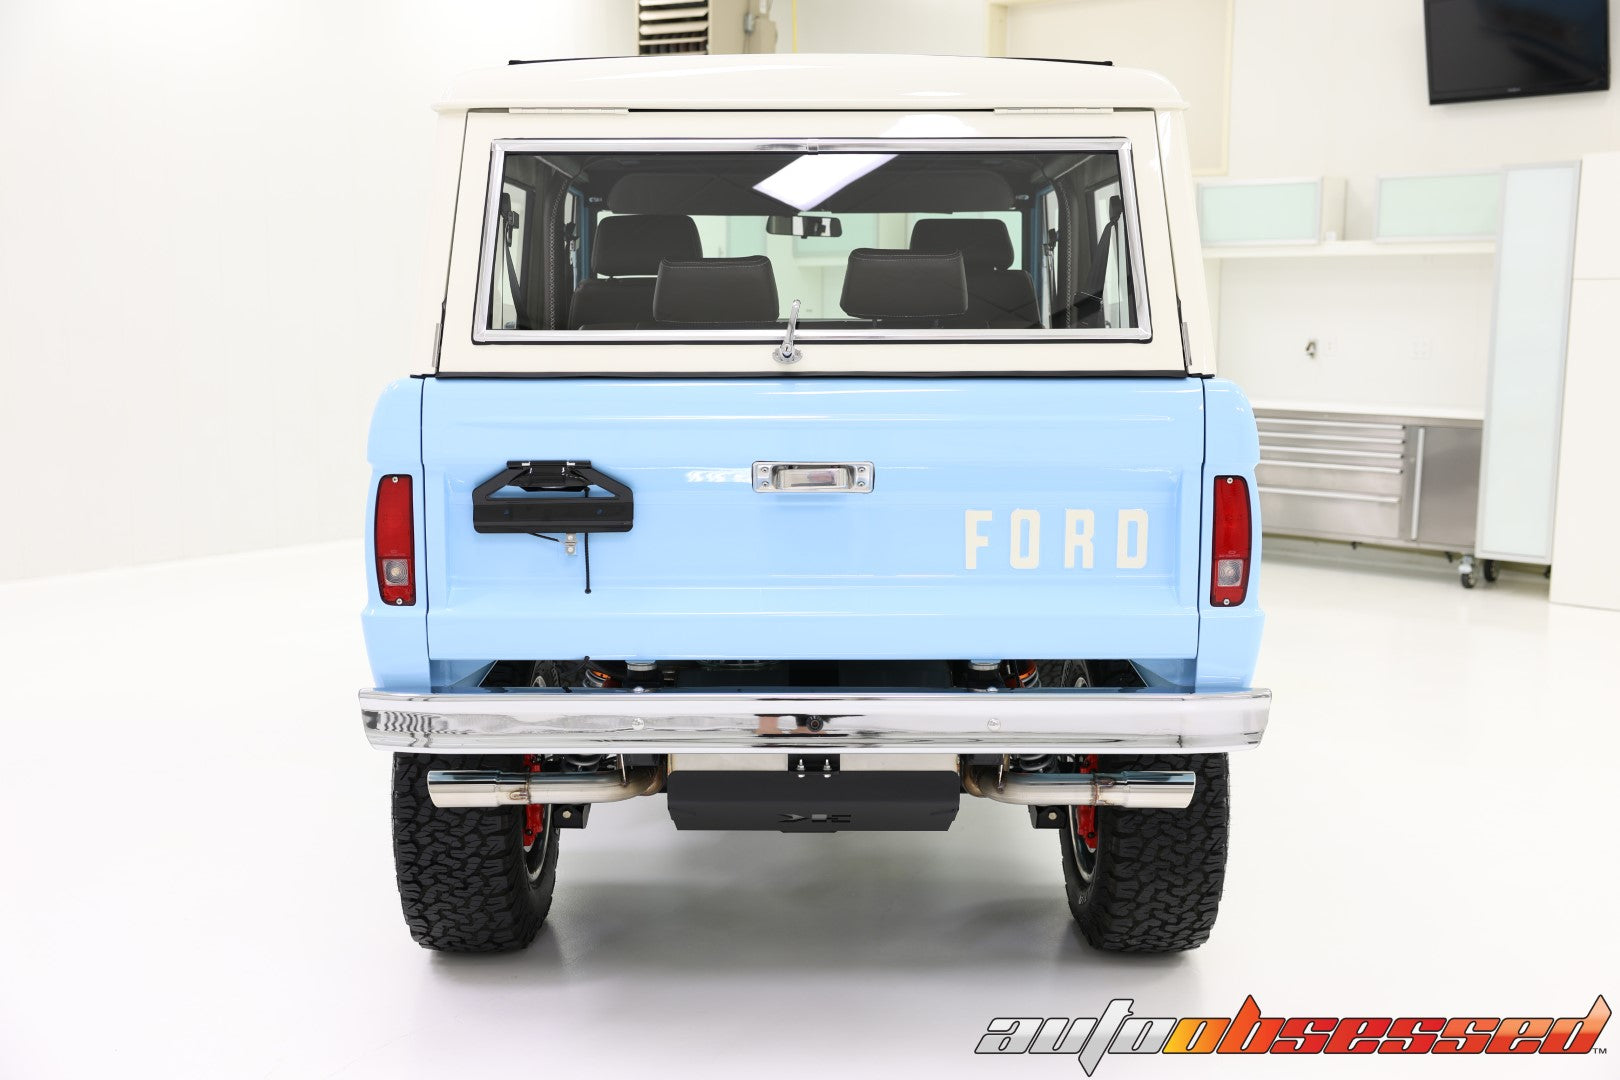 1974 Ford Bronco New Vehicle Prep - Auto Obsessed